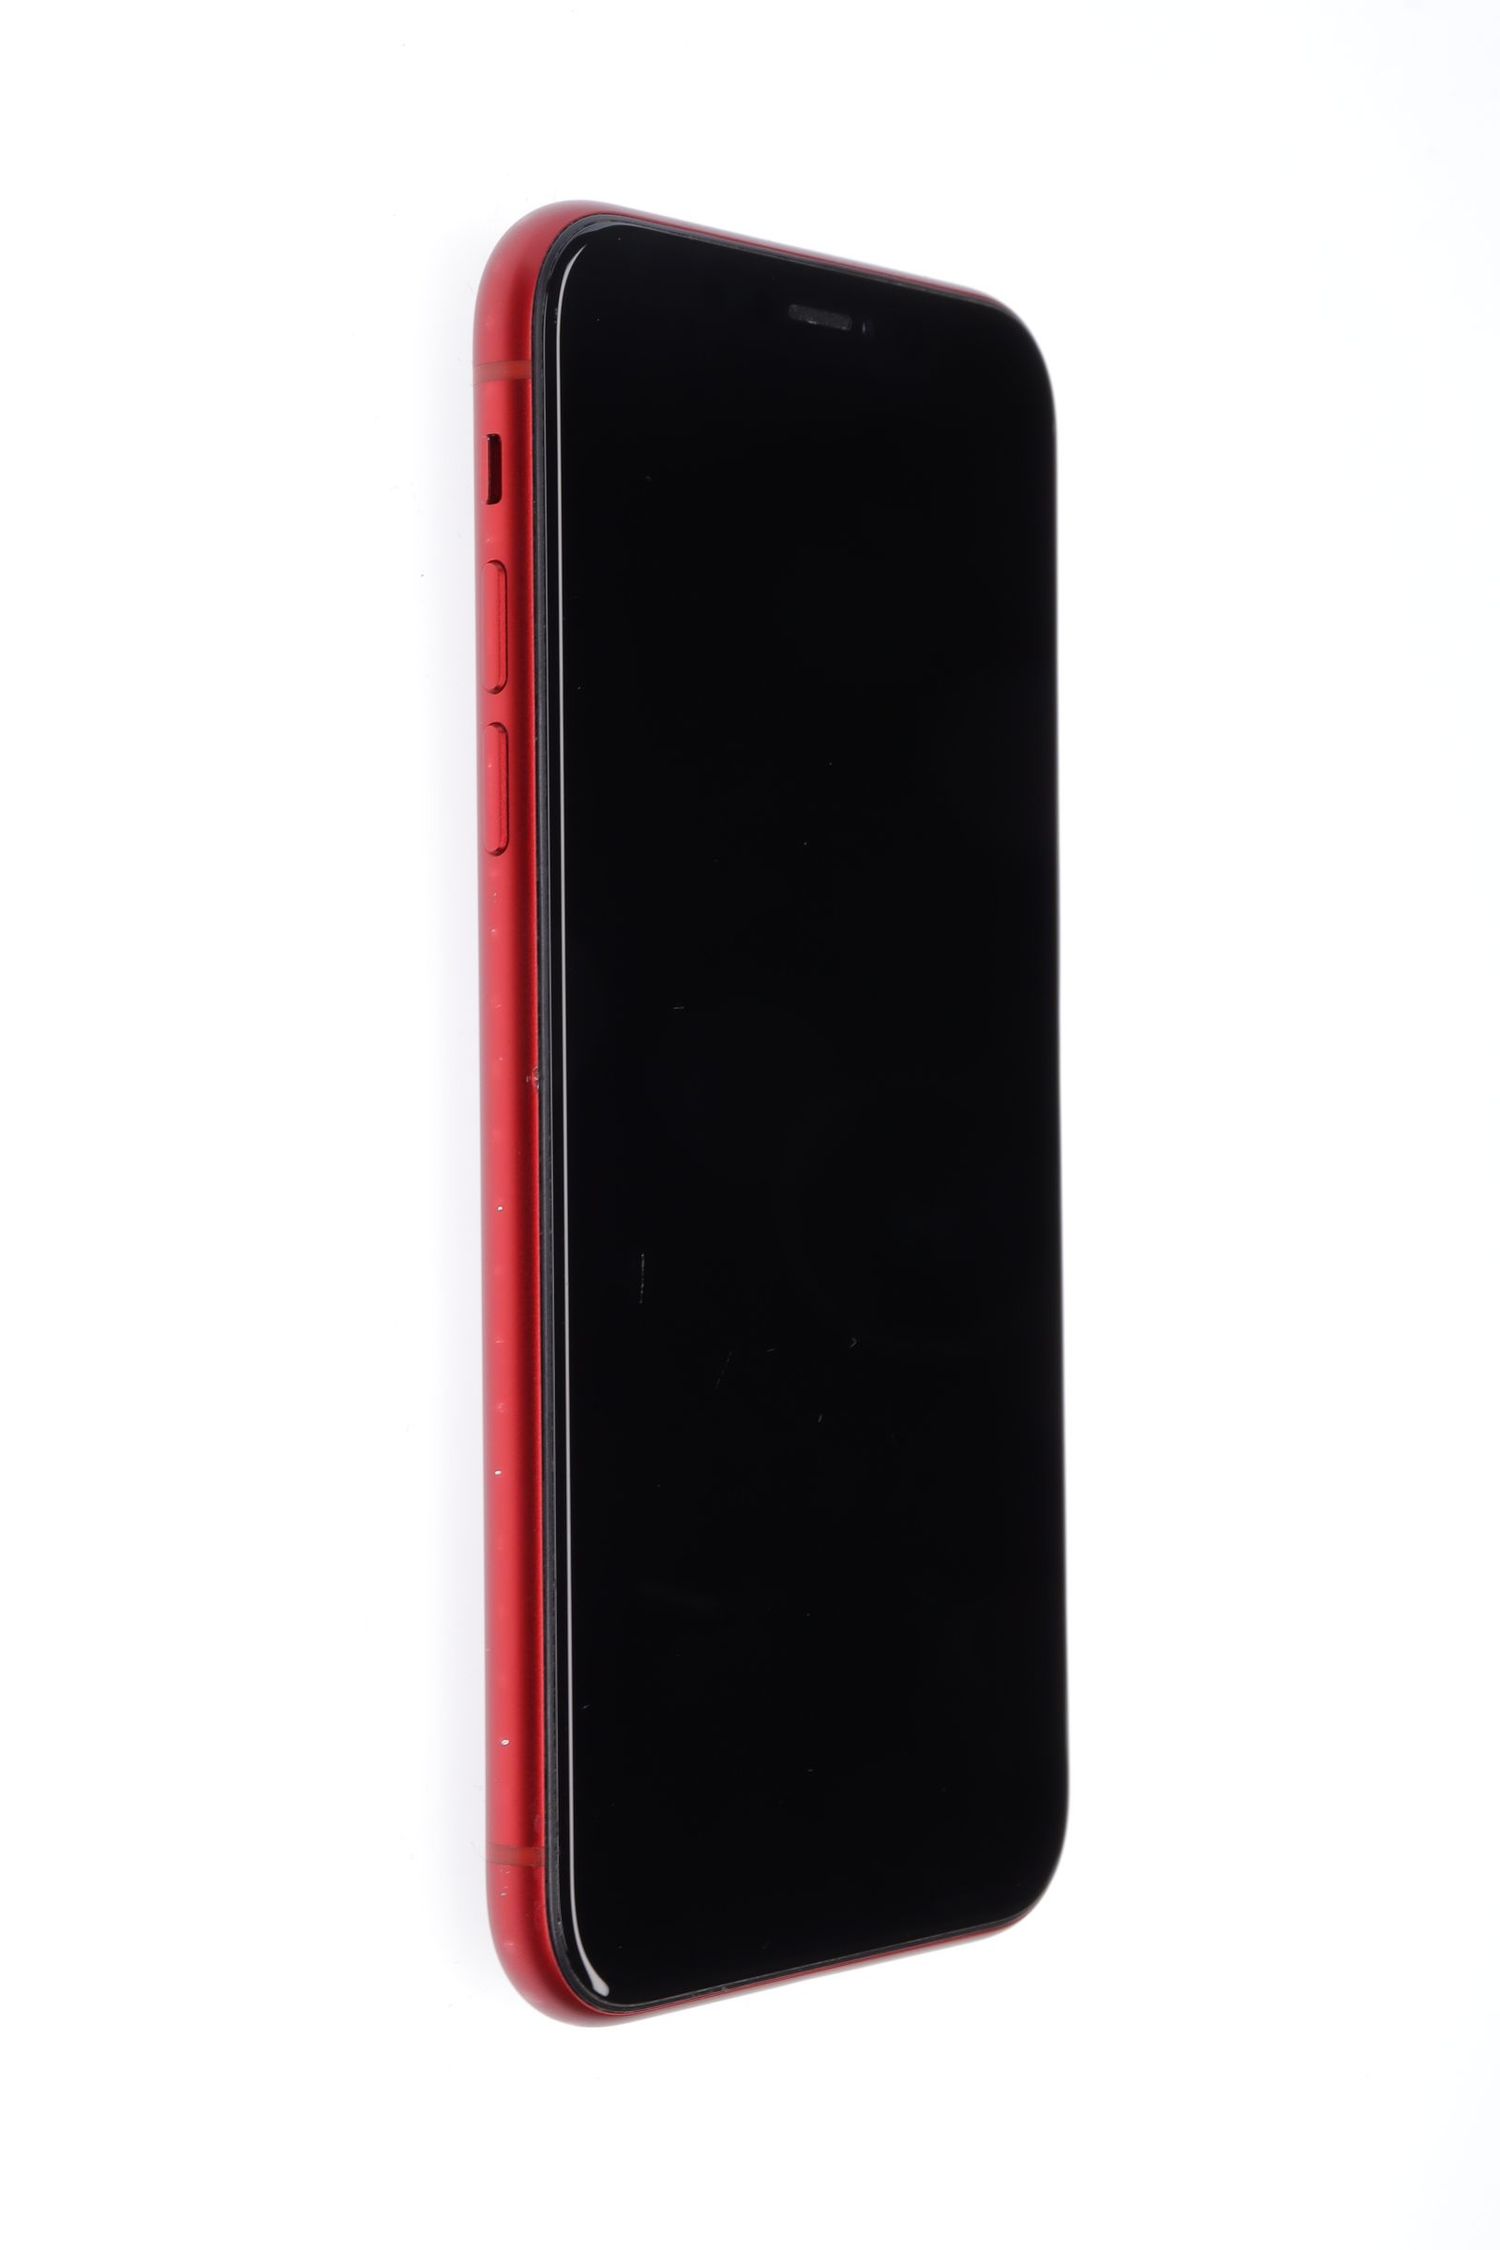 Telefon mobil Apple iPhone XR, Red, 64 GB, Excelent